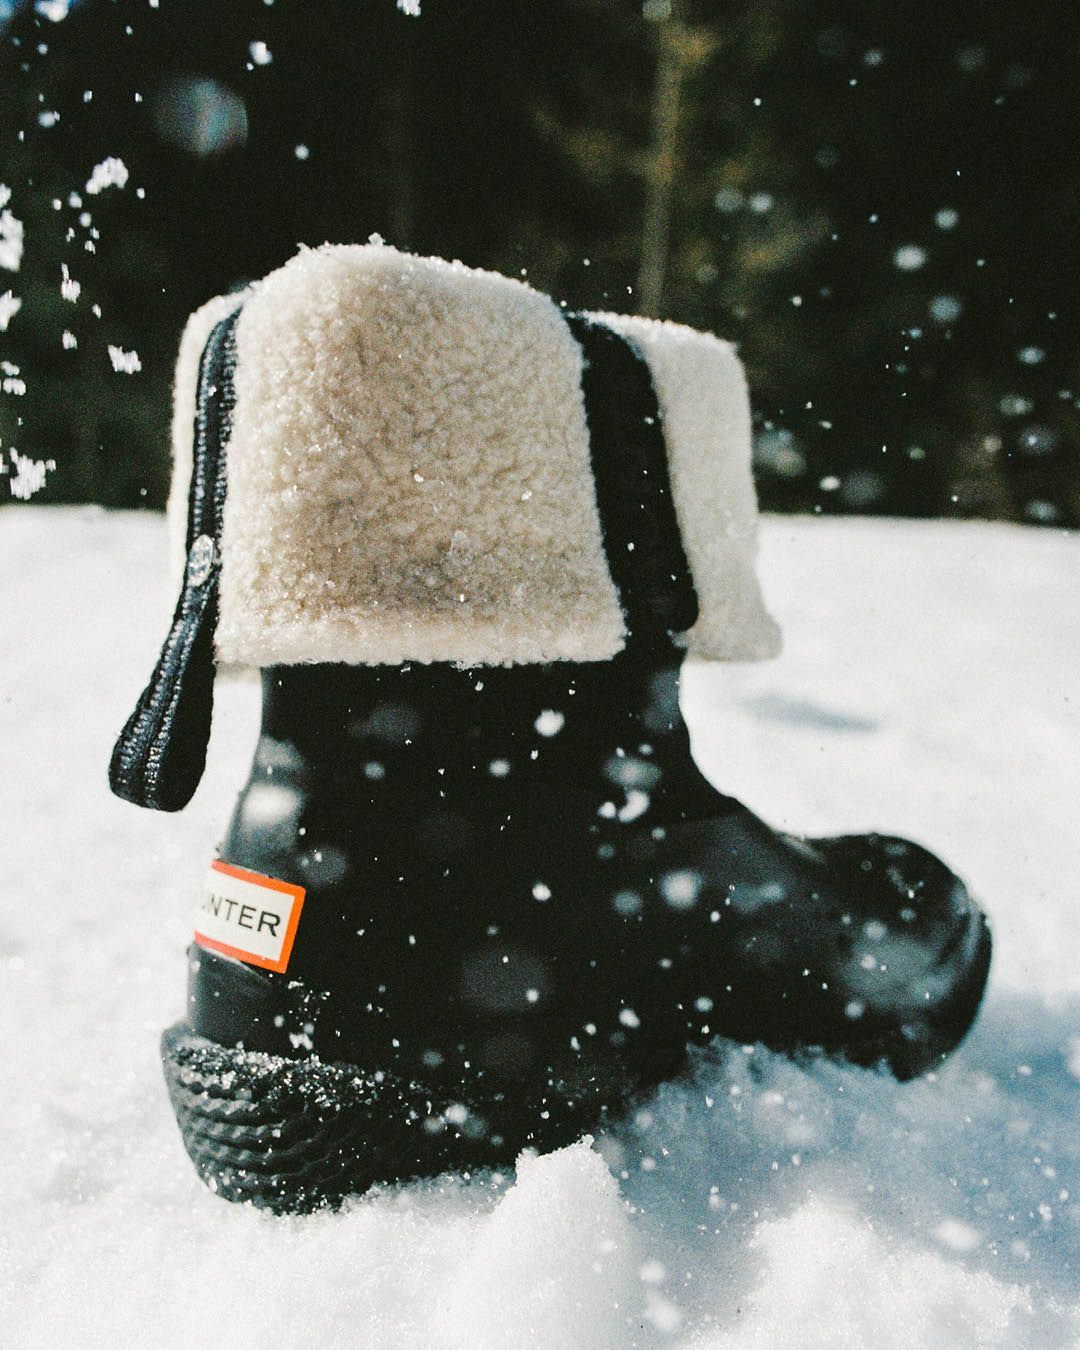 Tackle Snow With Hunter’s Insulated Winter Boots